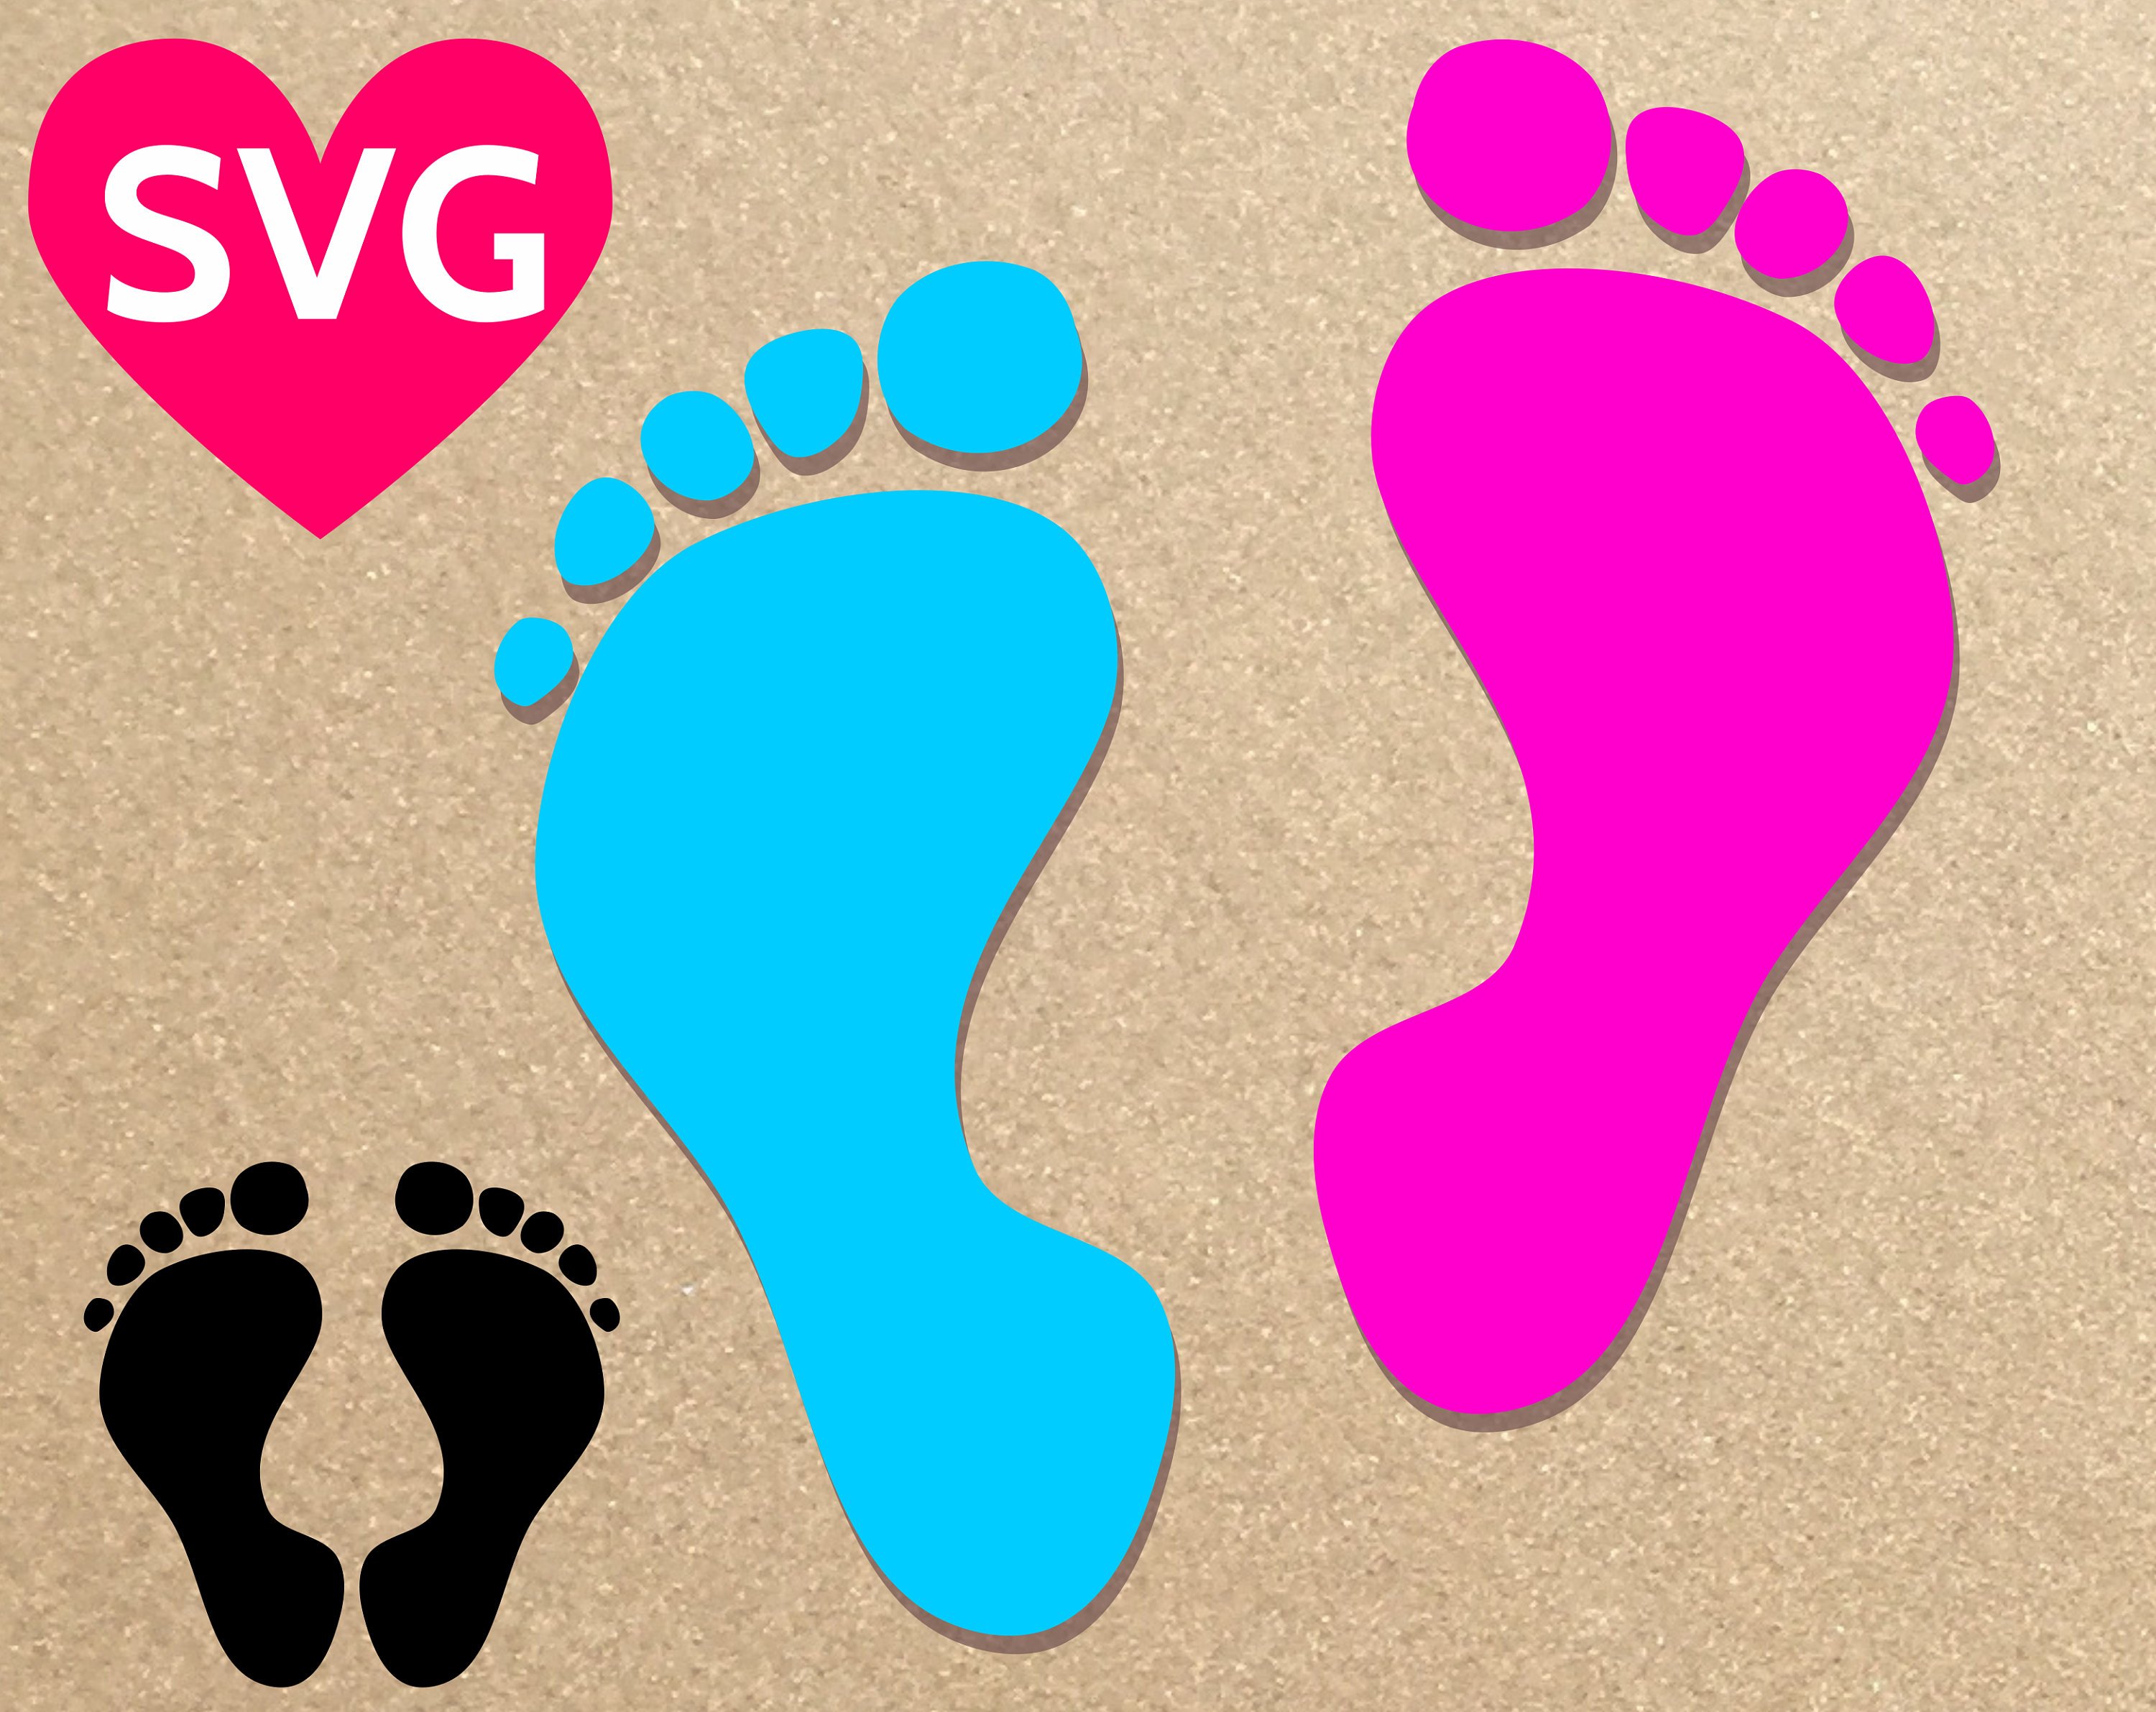 Download Baby Feet Silhouette at GetDrawings.com | Free for ...